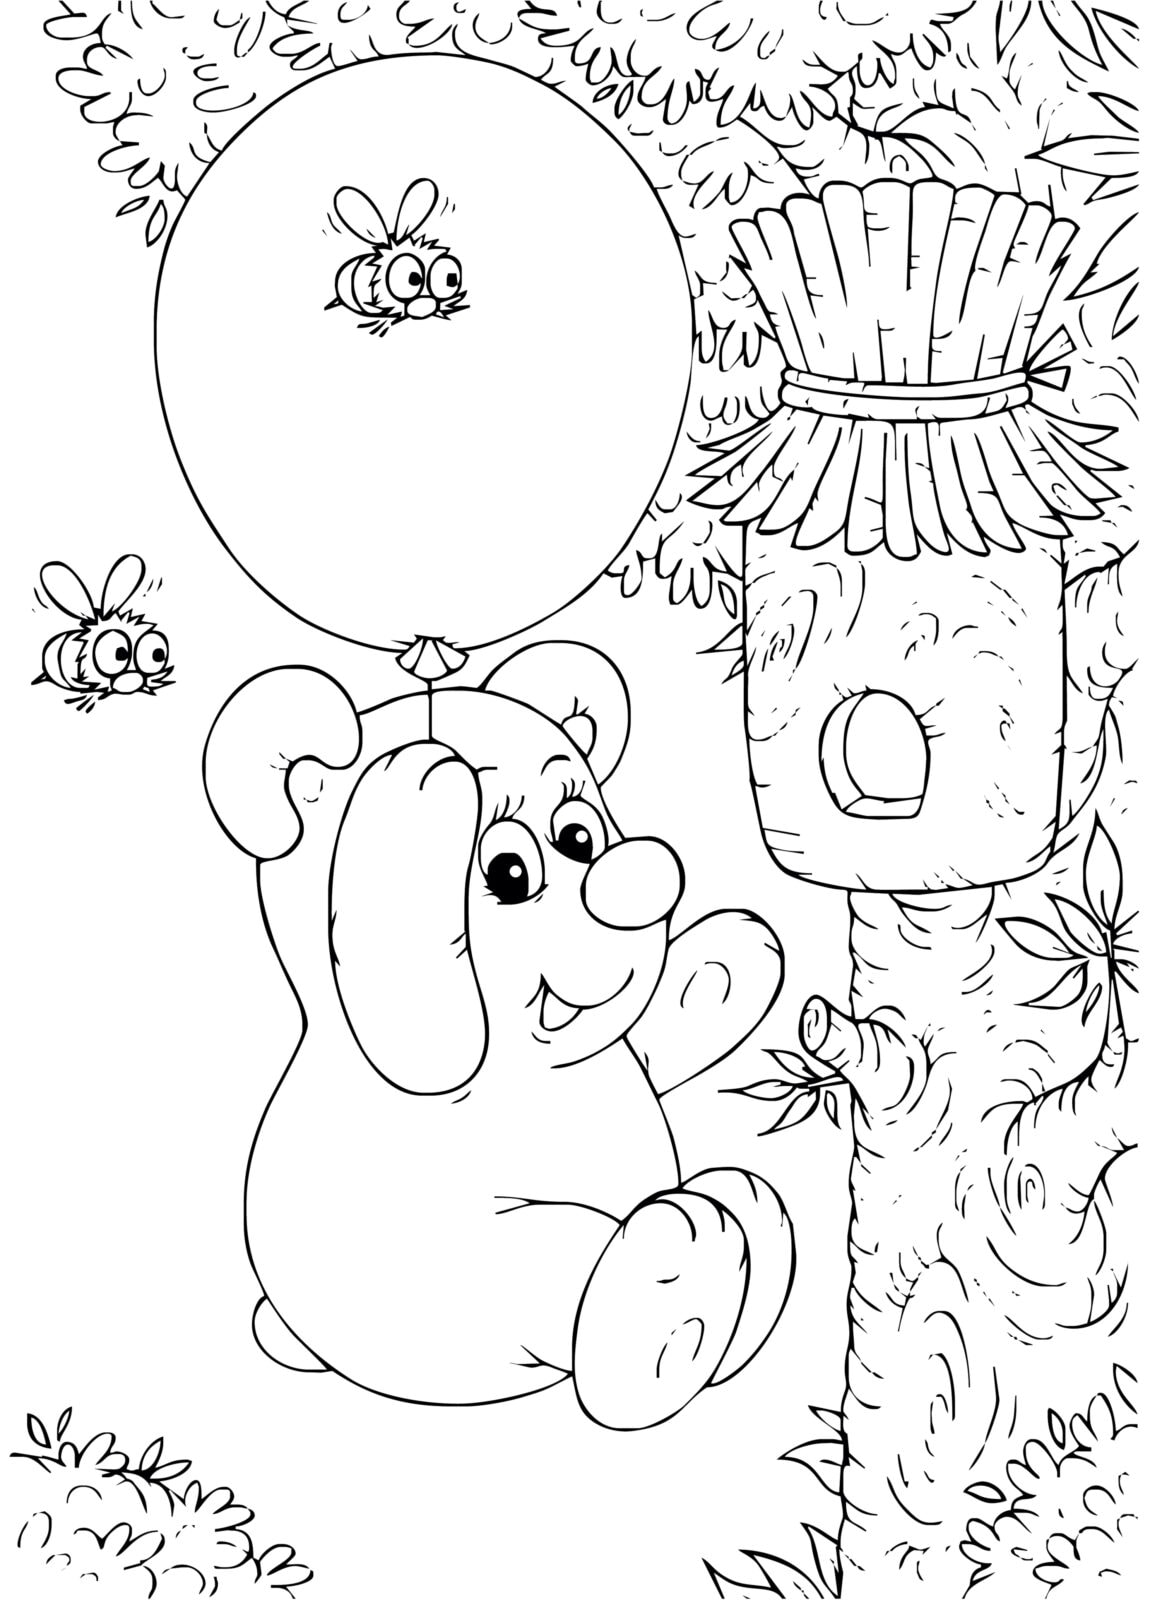 Printable coloring page of honey bear for children